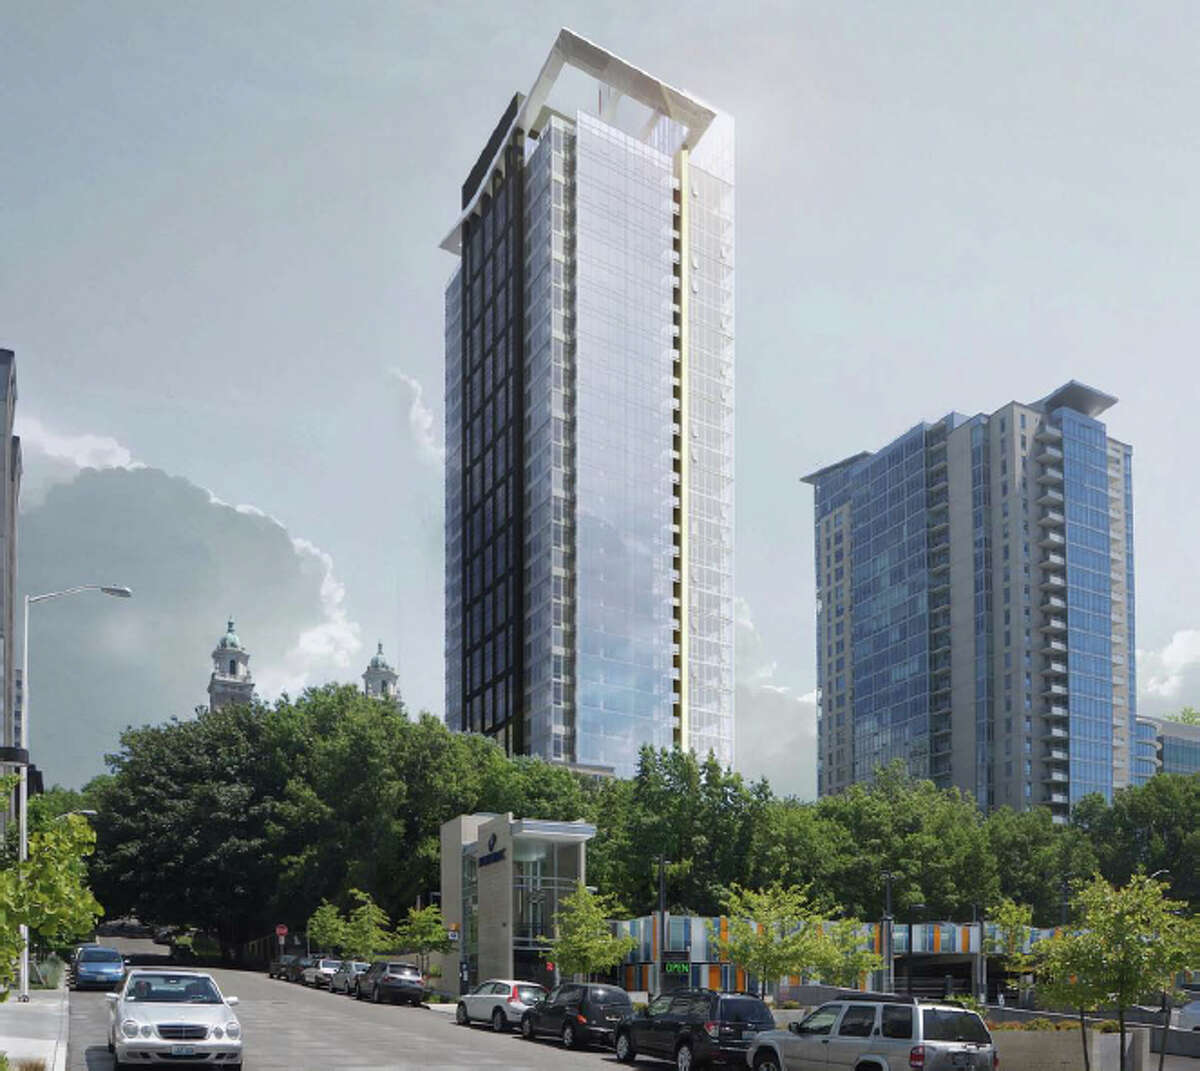 At 30 stories, developer Alecta's planned apartment tower wouldn't be nearly the tallest building in Seattle. But it's location, at Eighth Avenue and Columbia Street, in First Hill, ensures it will stand out. The project includes 287 apartments and a 9,000-square-foot neighborhood park.